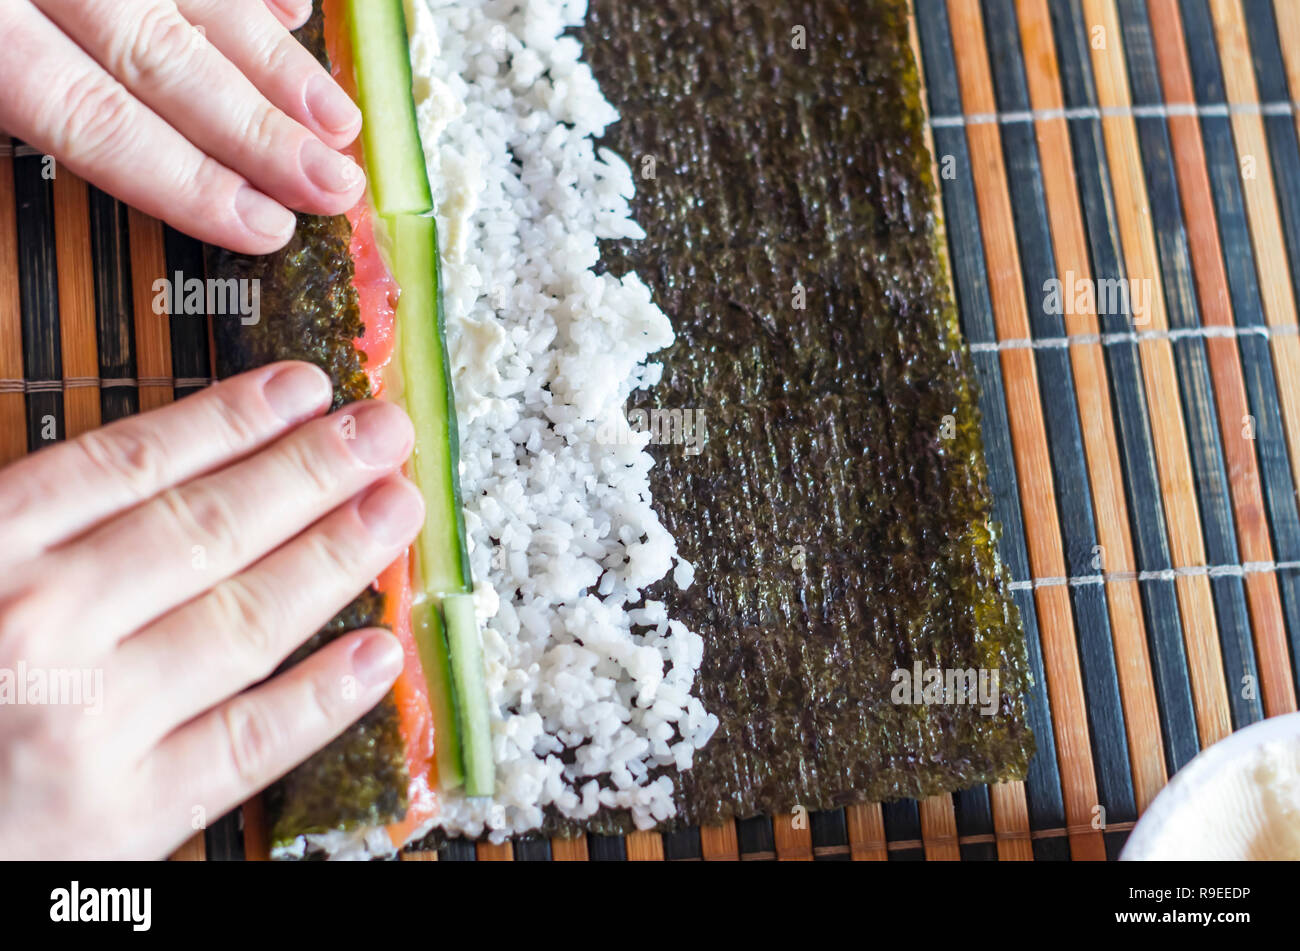 https://c8.alamy.com/comp/R9EEDP/making-sushi-rolls-at-home-female-hands-roll-nori-seaweed-sheet-on-a-bamboo-mat-ingredients-salmon-fish-strips-cucumber-sticks-cream-cheese-and-R9EEDP.jpg